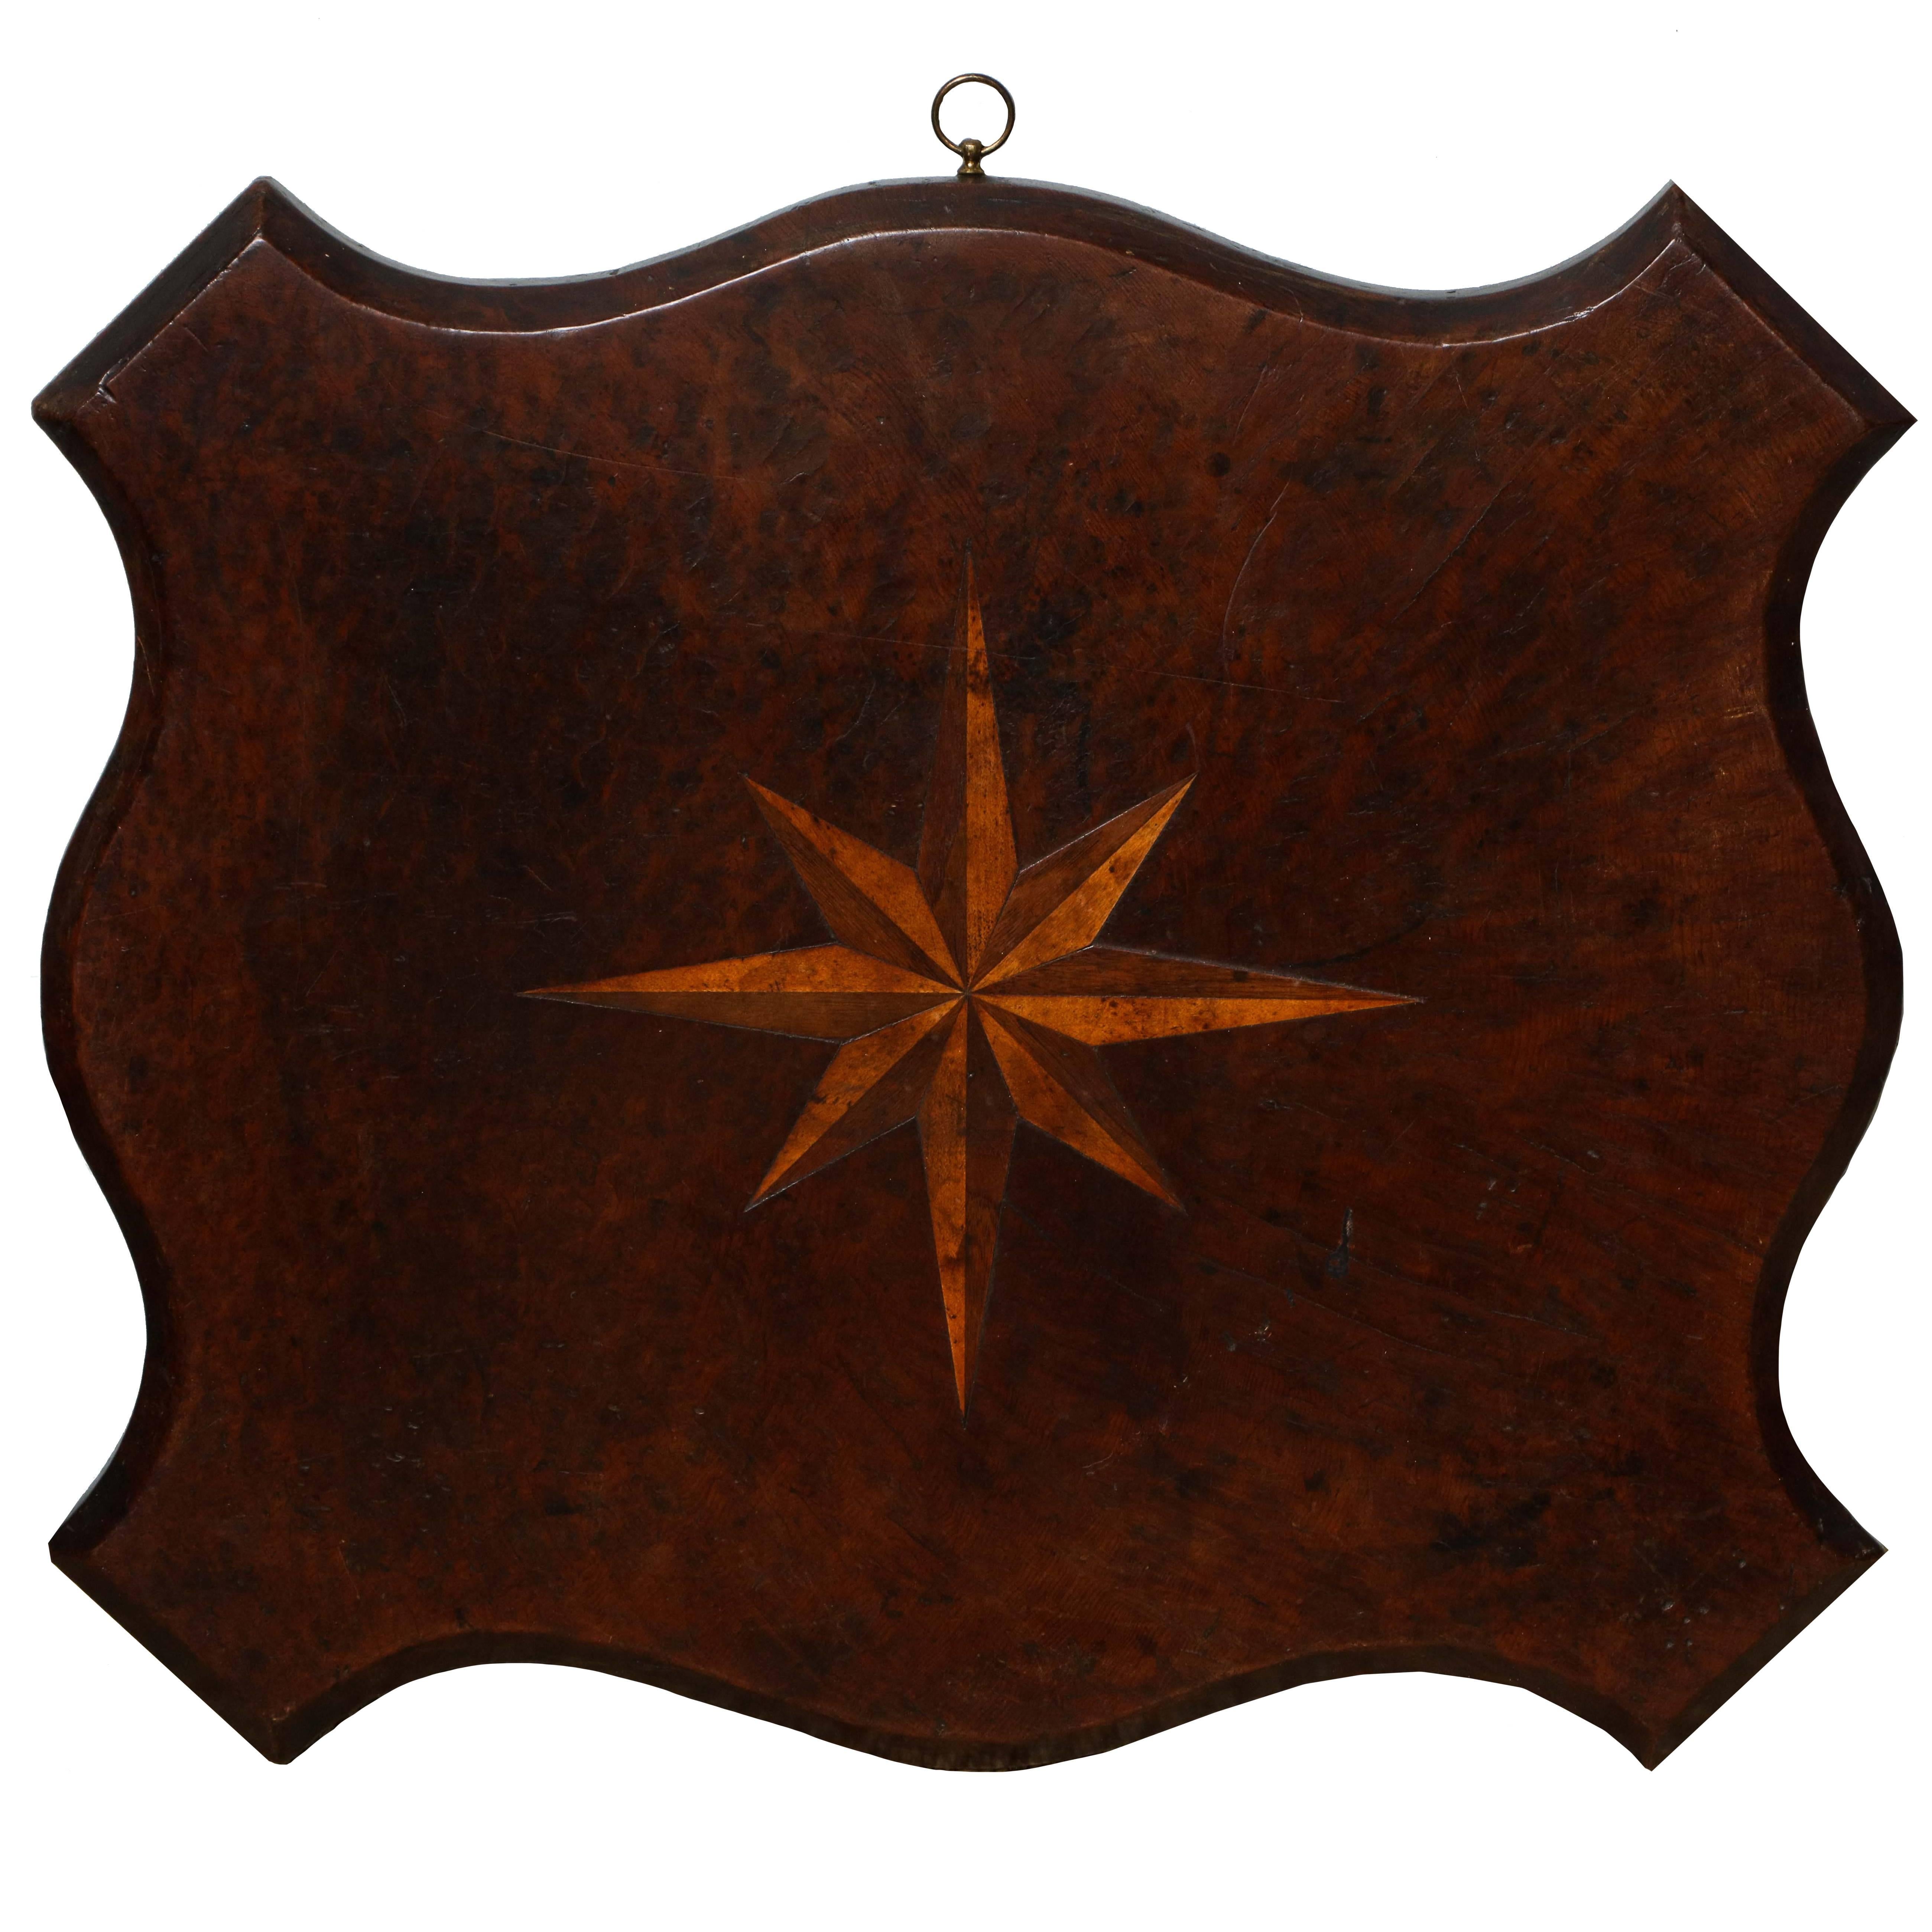 Fine Shaped Burl Tabletop with Compass Star Inlay